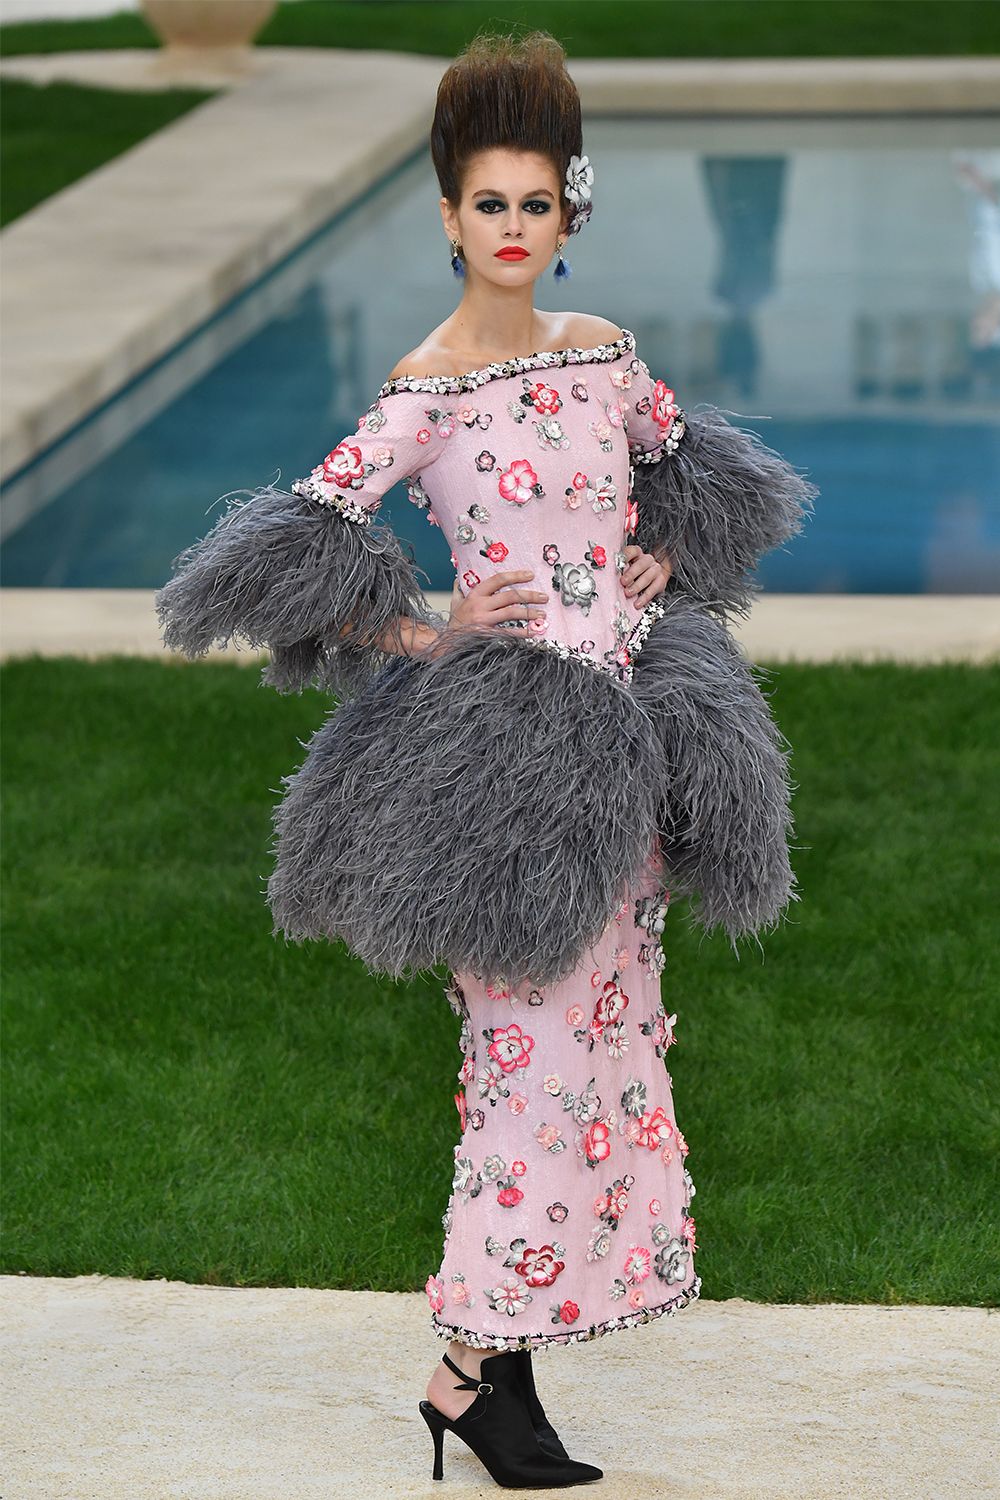 7 Trends From Chanel Couture We'll See Everywhere in 2019 | Who What Wear